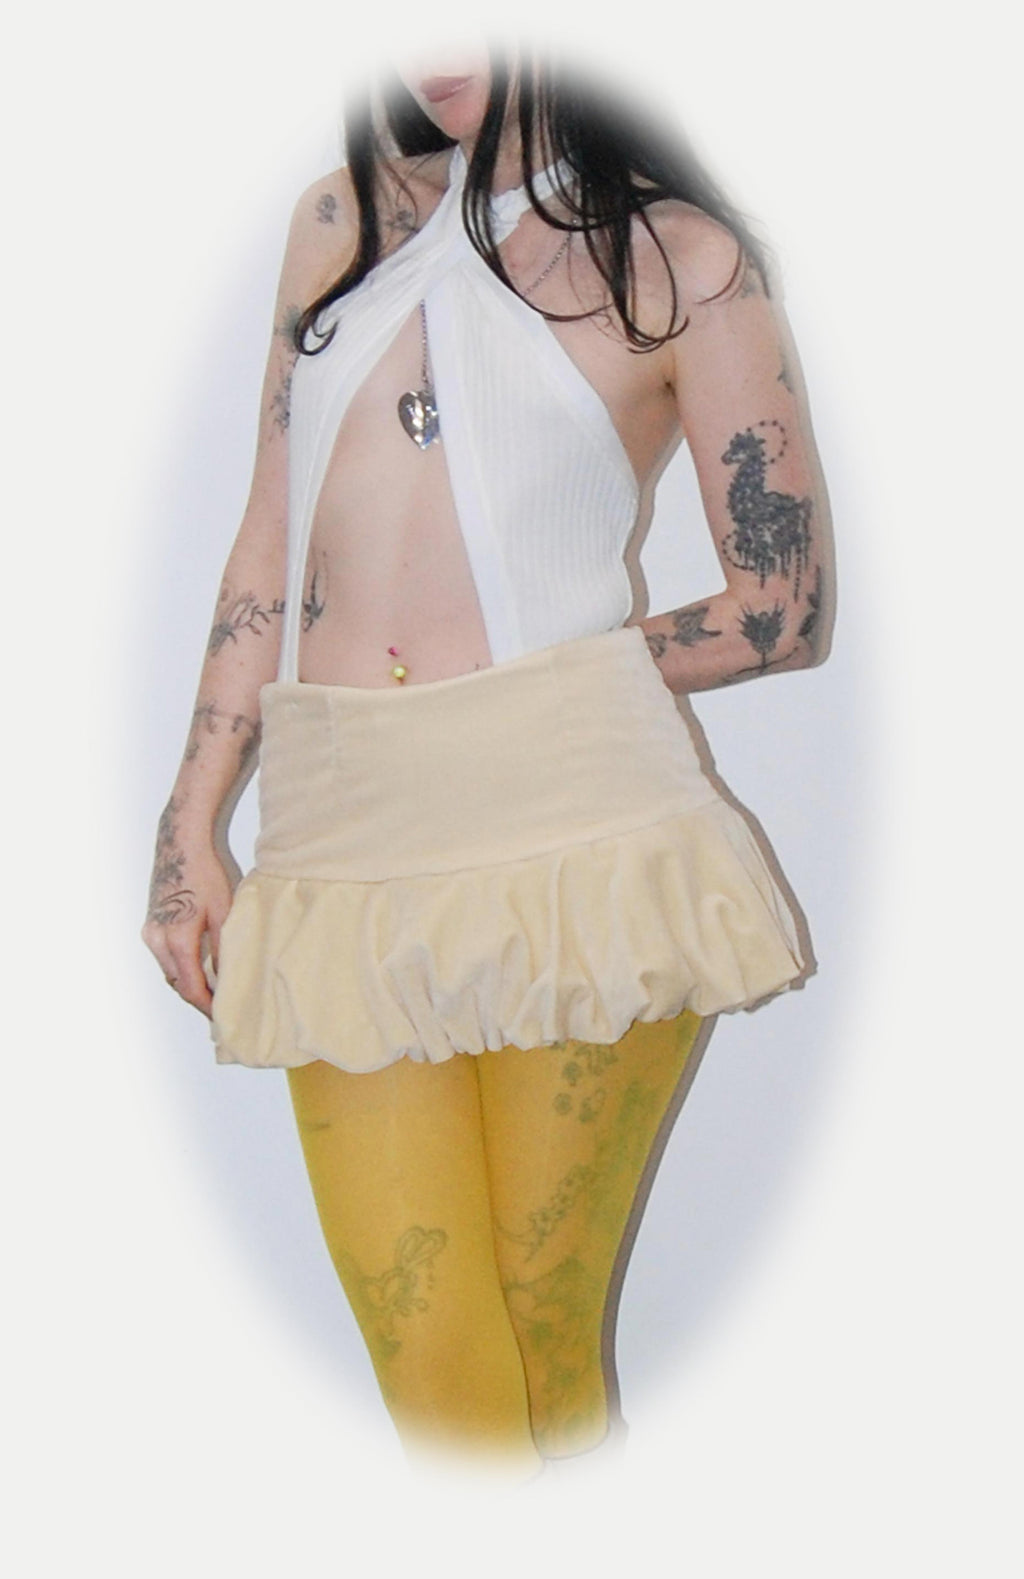 Maroske Peech A flirty playful bubble mid waisted mini skirt that salutes the fashion trends of the 1980s. This mid rise puffball style is created with a crinoline inner foundation to hold its balloon-like shape. A wonderful way to add volume to a silhouette